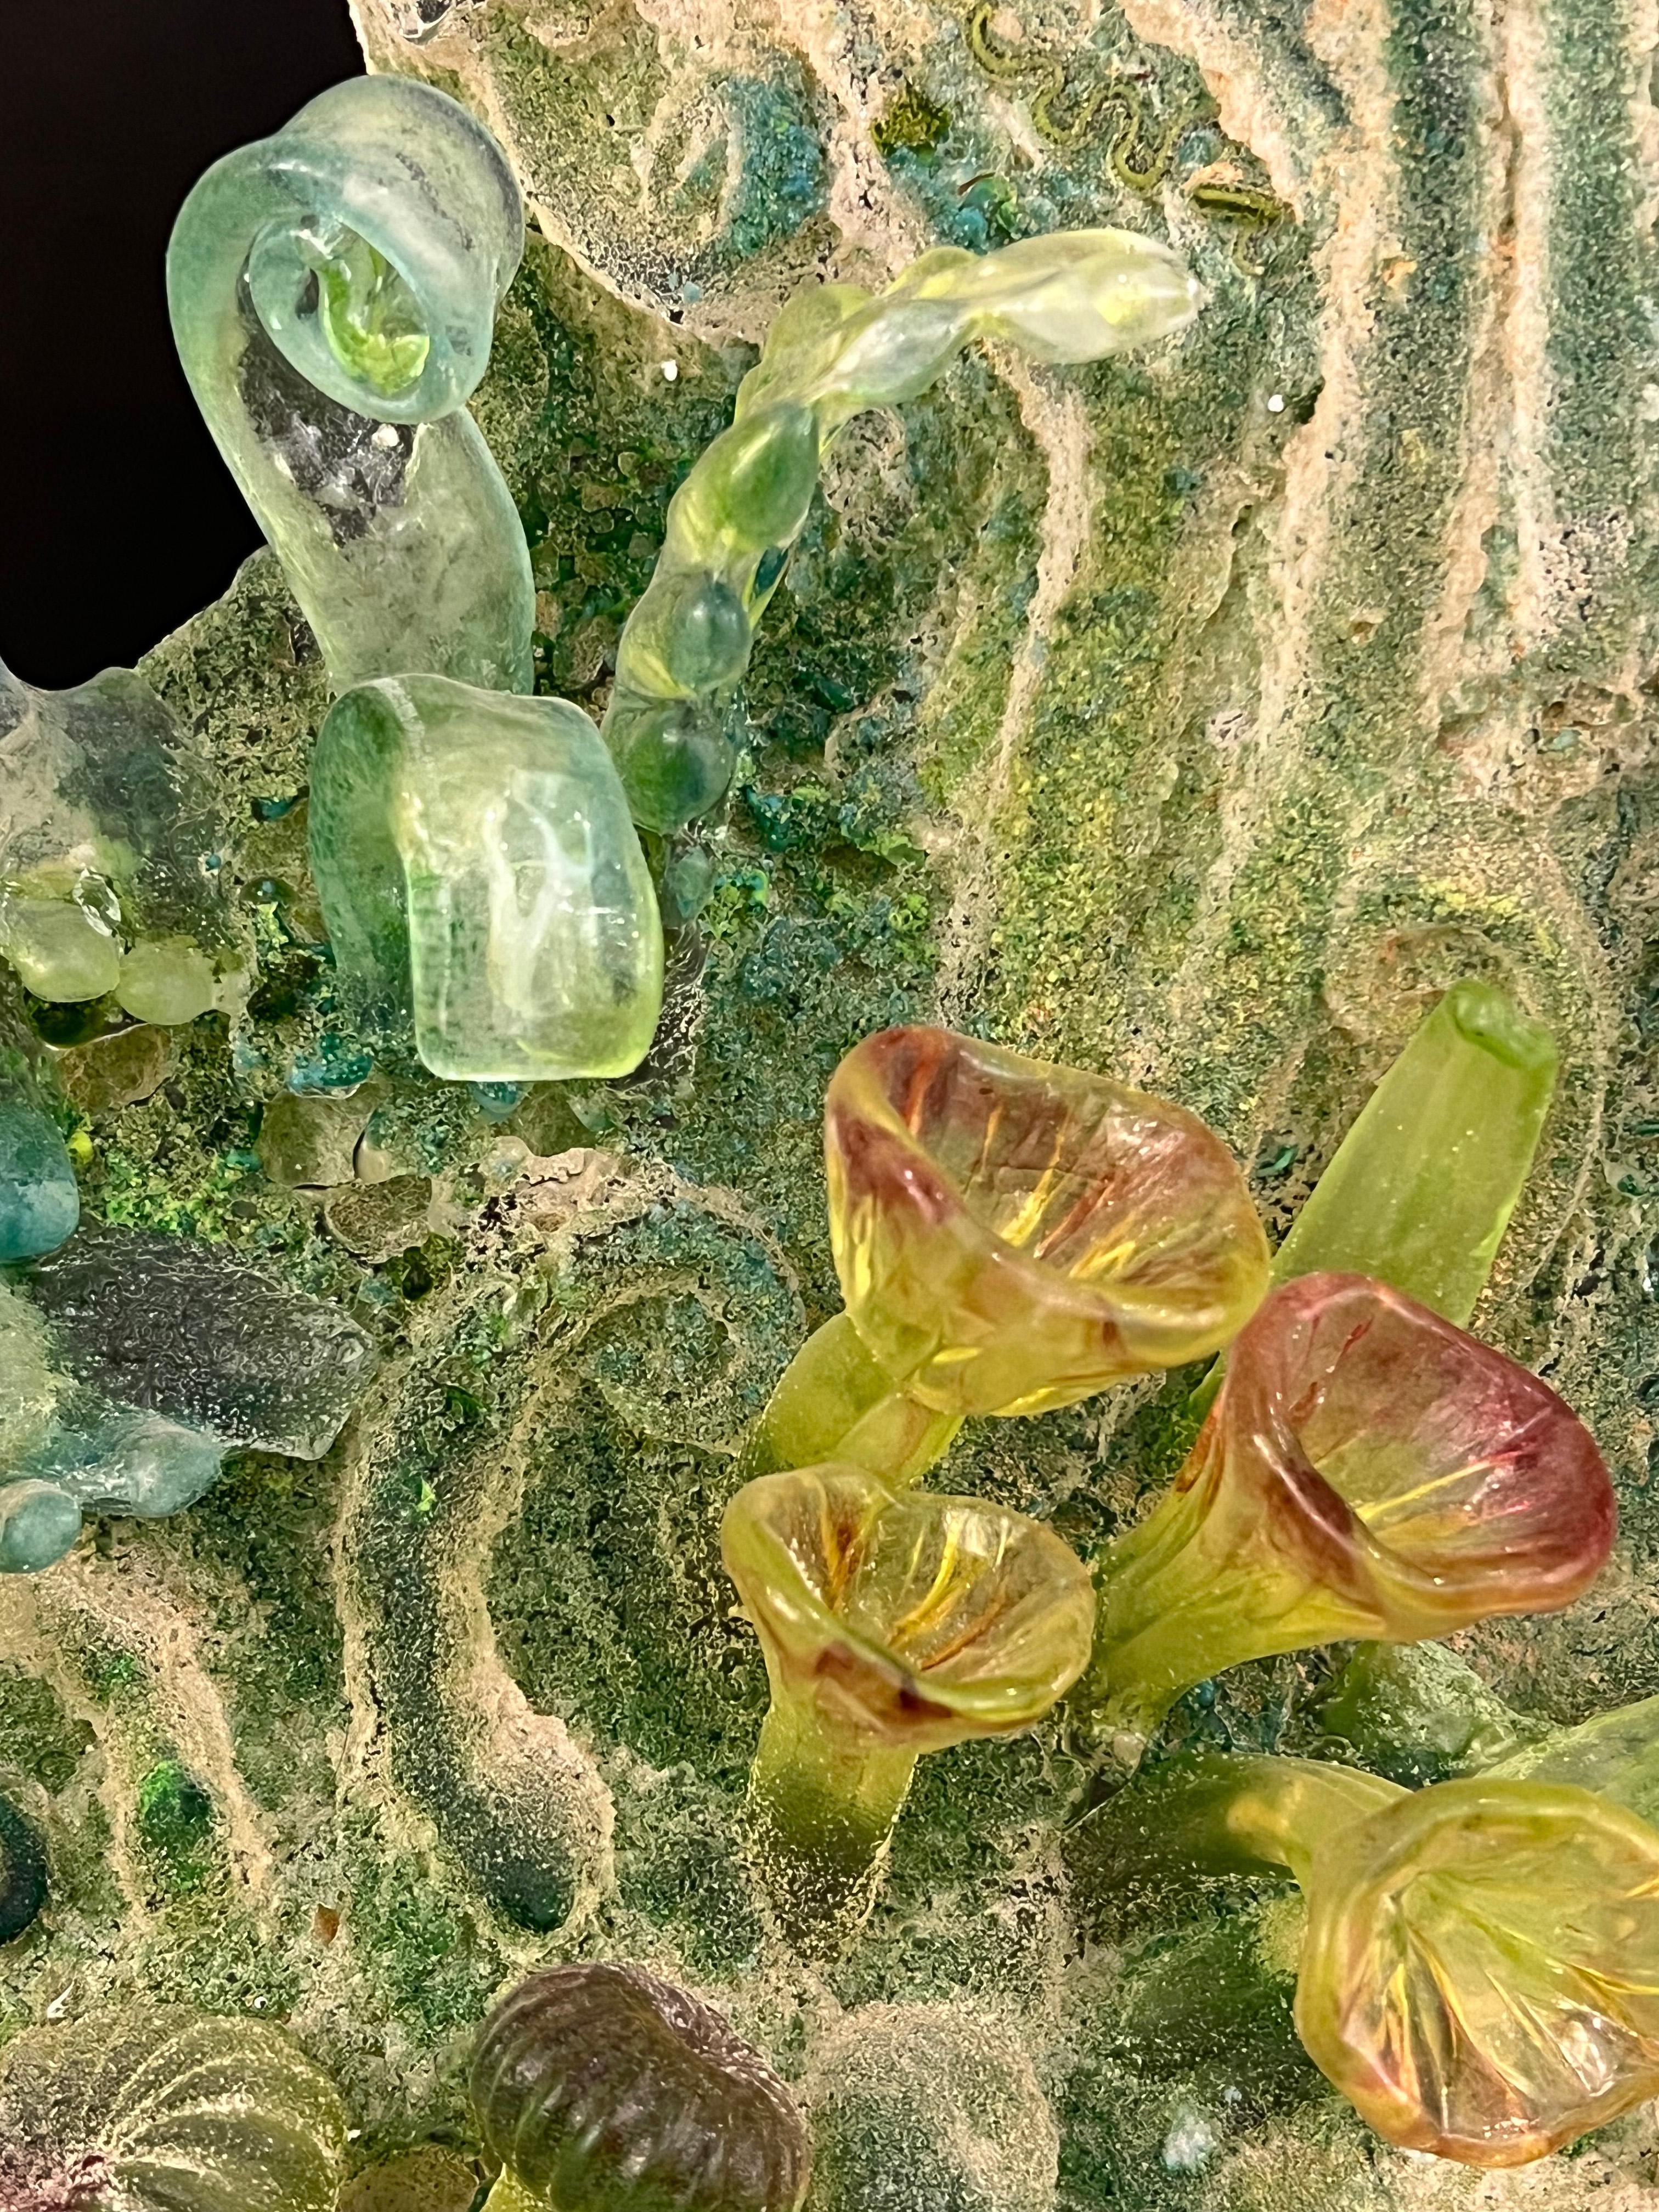 This work of art is inspired by the tiny plant-like organisms called zooxanthellae live in the tissues of many animals including corals, anemones, jellyfish, sponges and foraminifera. These microscopic algae capture sunlight and convert it into